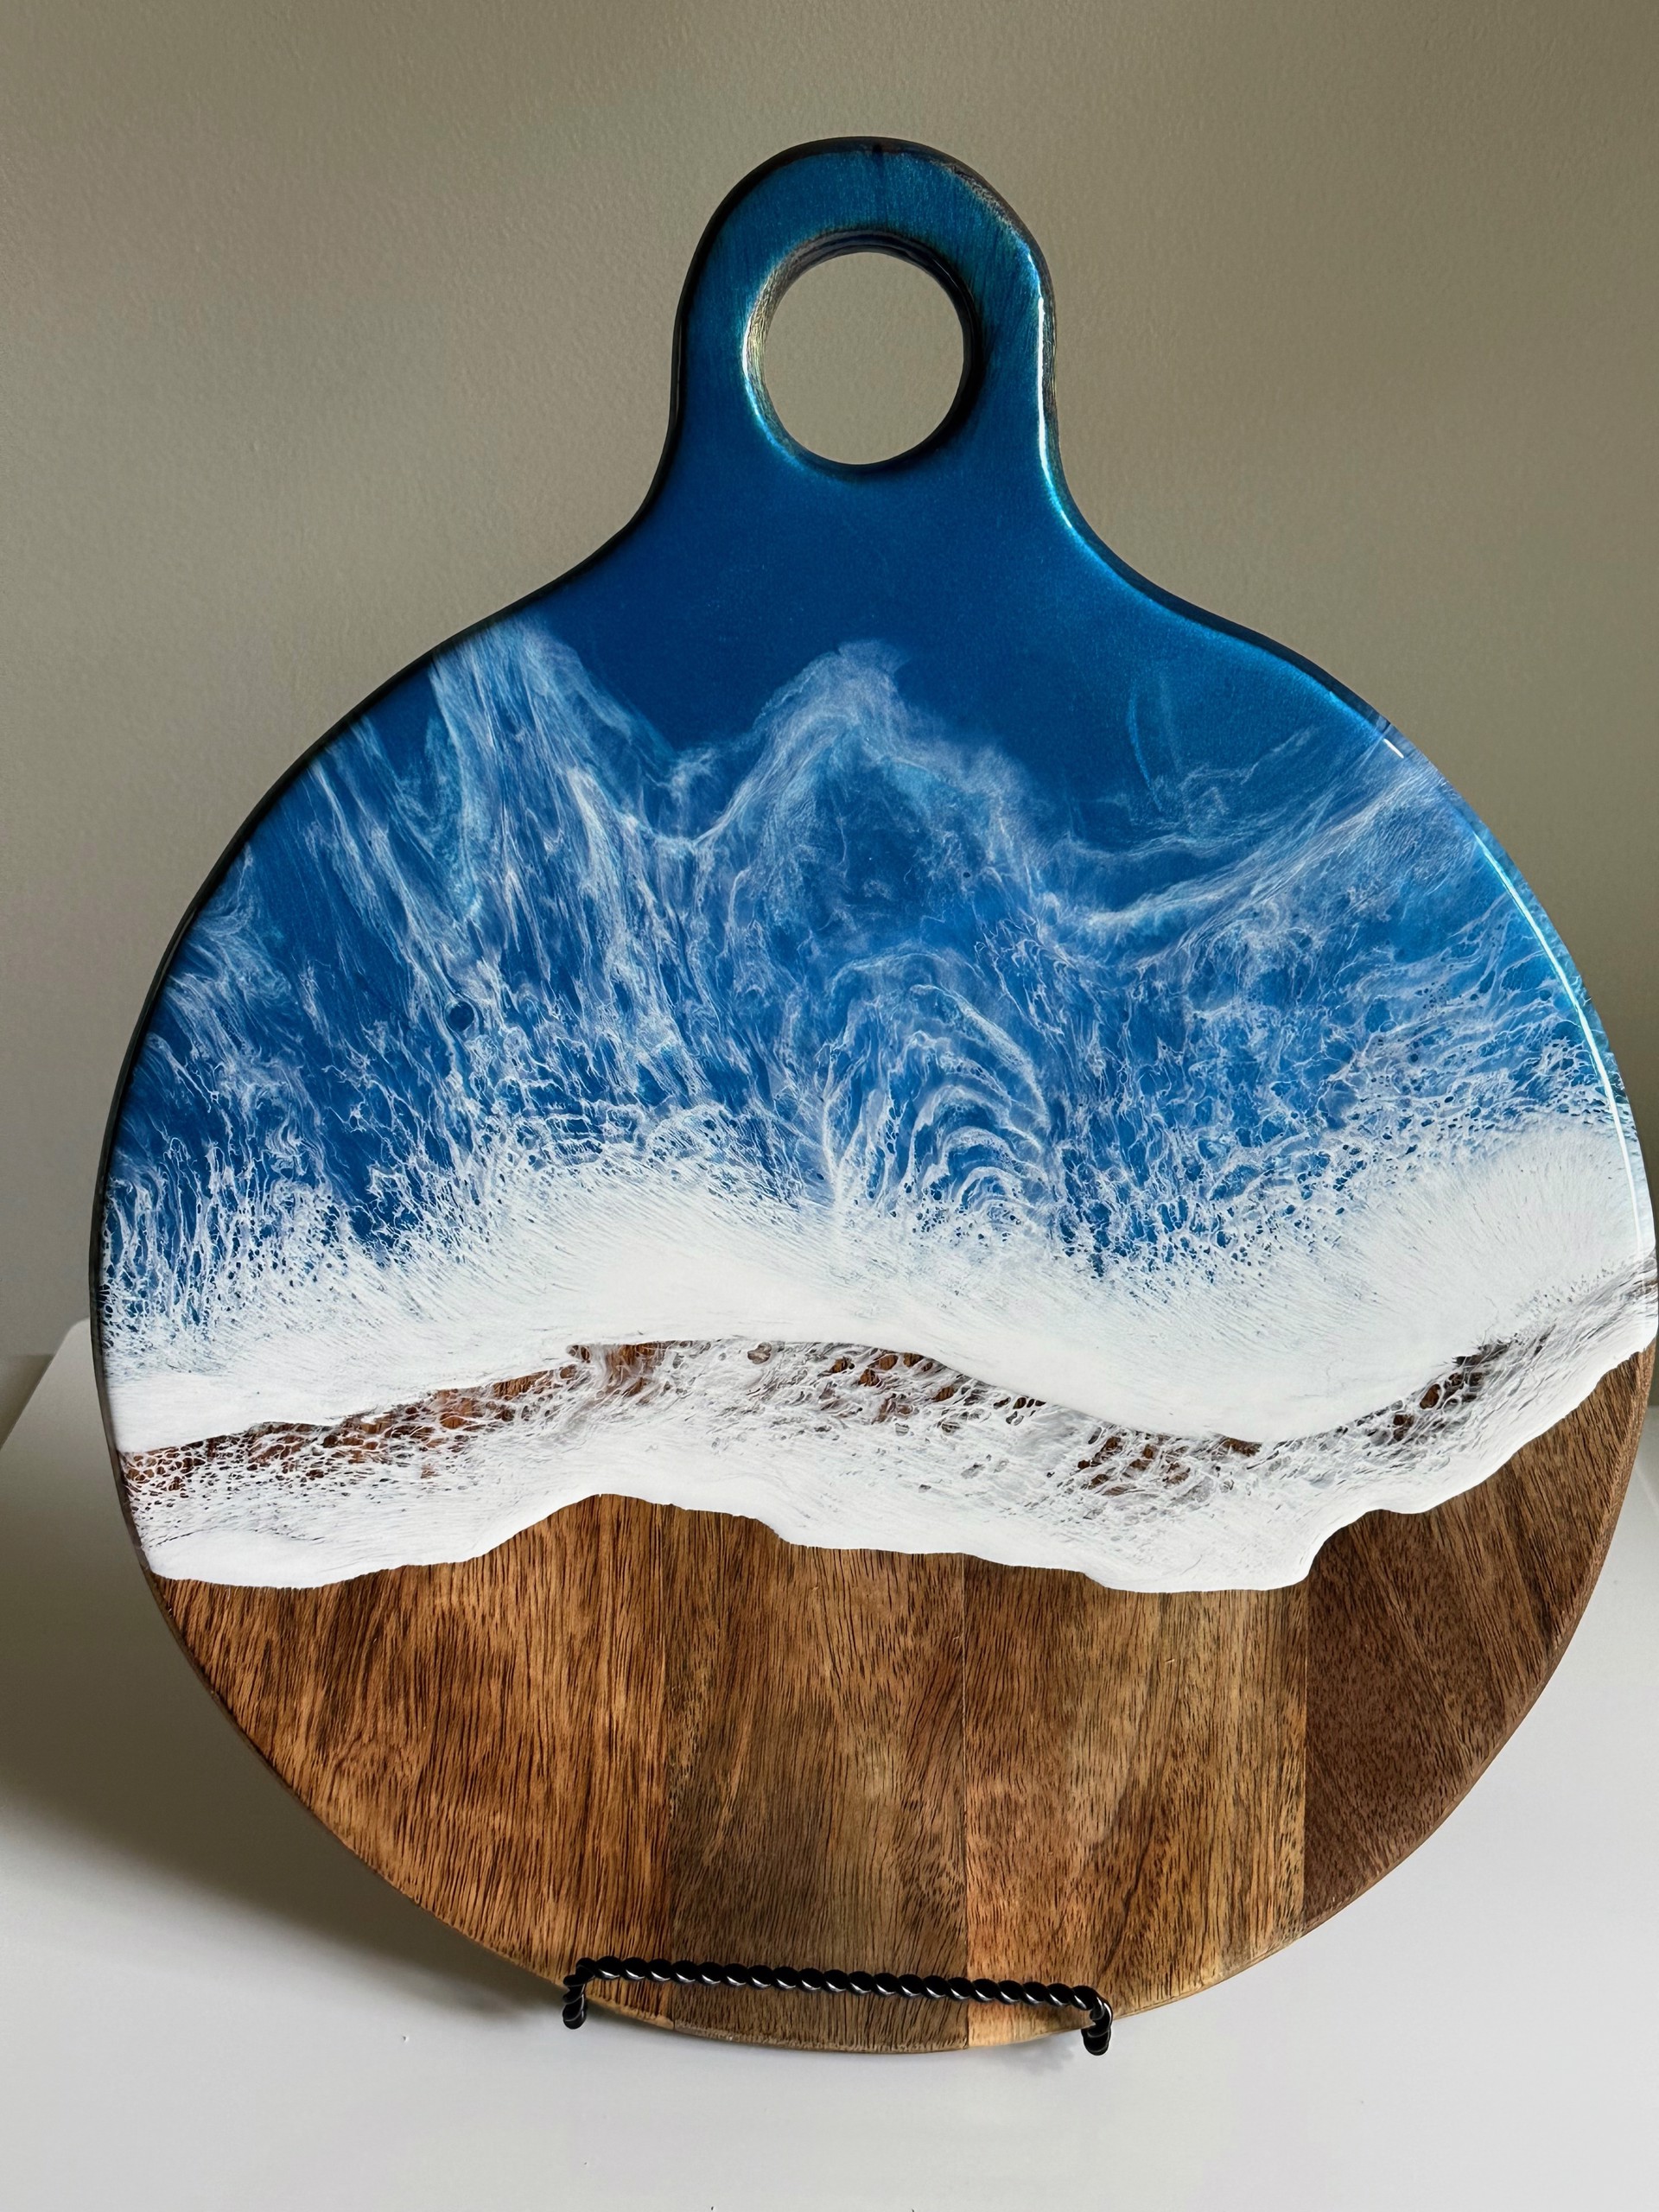 Resin and Wood Charcuterie Board MSM23-26 by Mary Duke McCartt